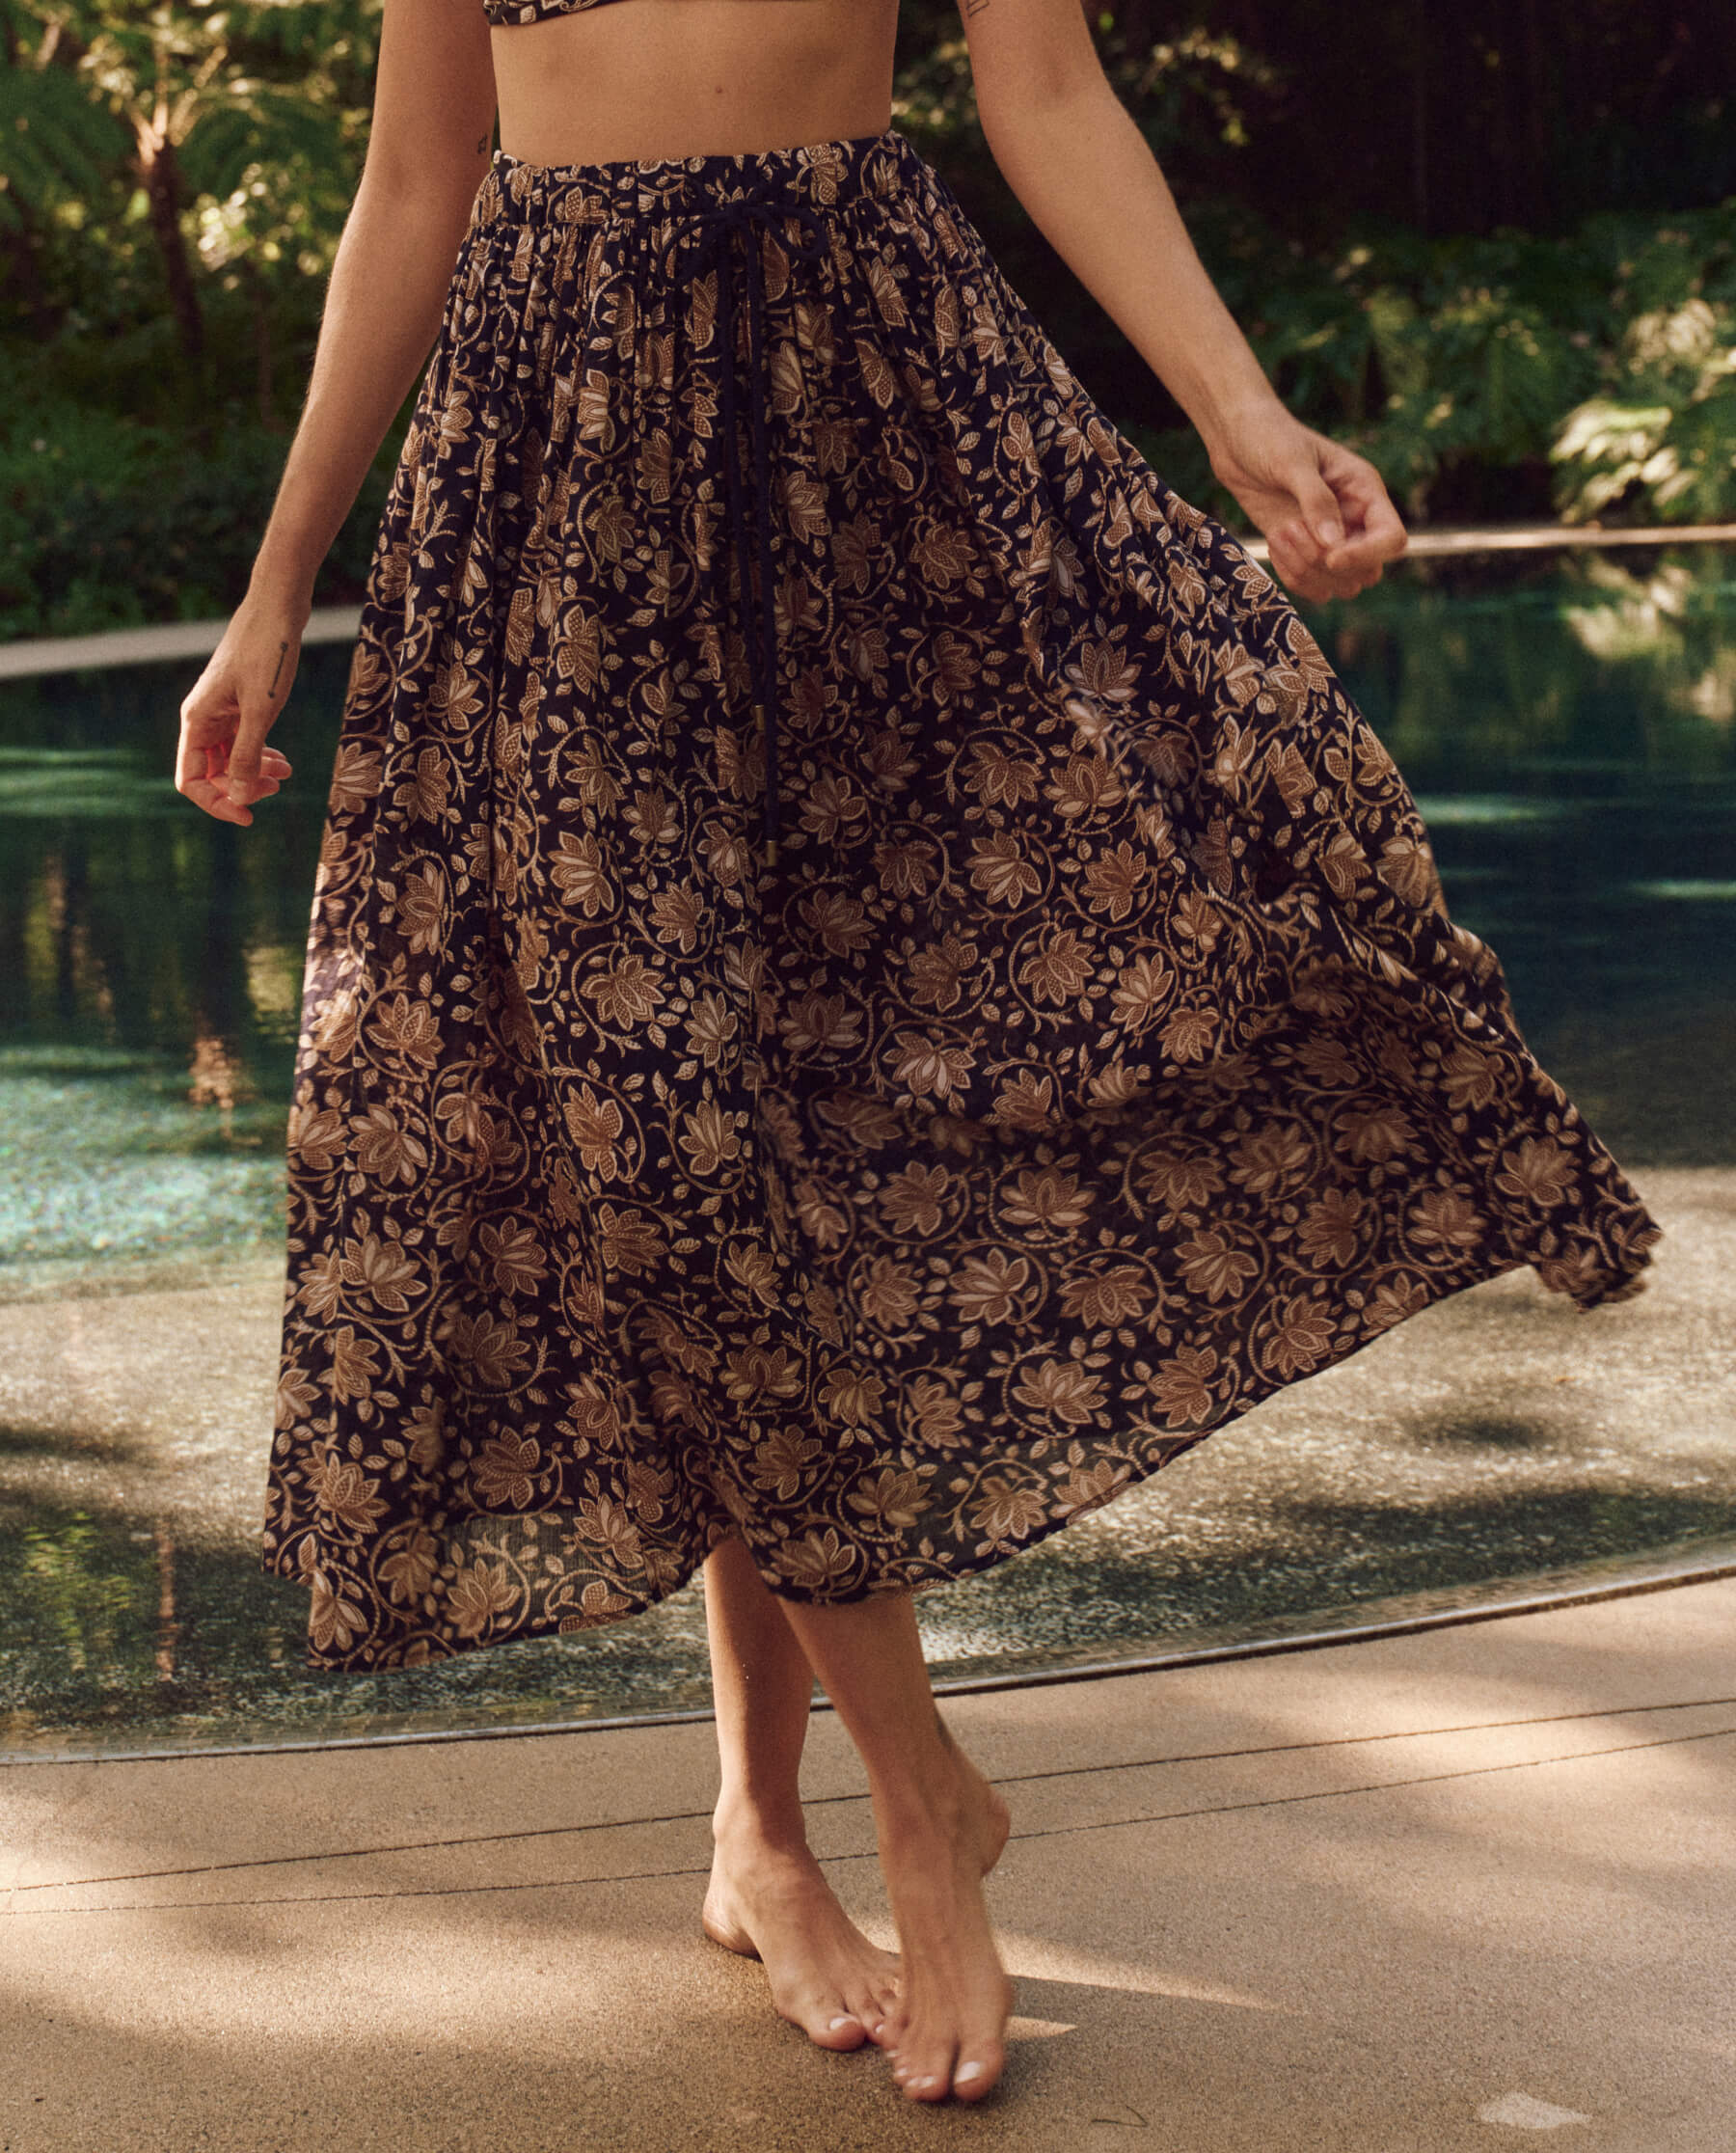 The Ripple Skirt. -- Black Oasis Floral COVER-UP SKIRTS THE GREAT. SP24 SWIM